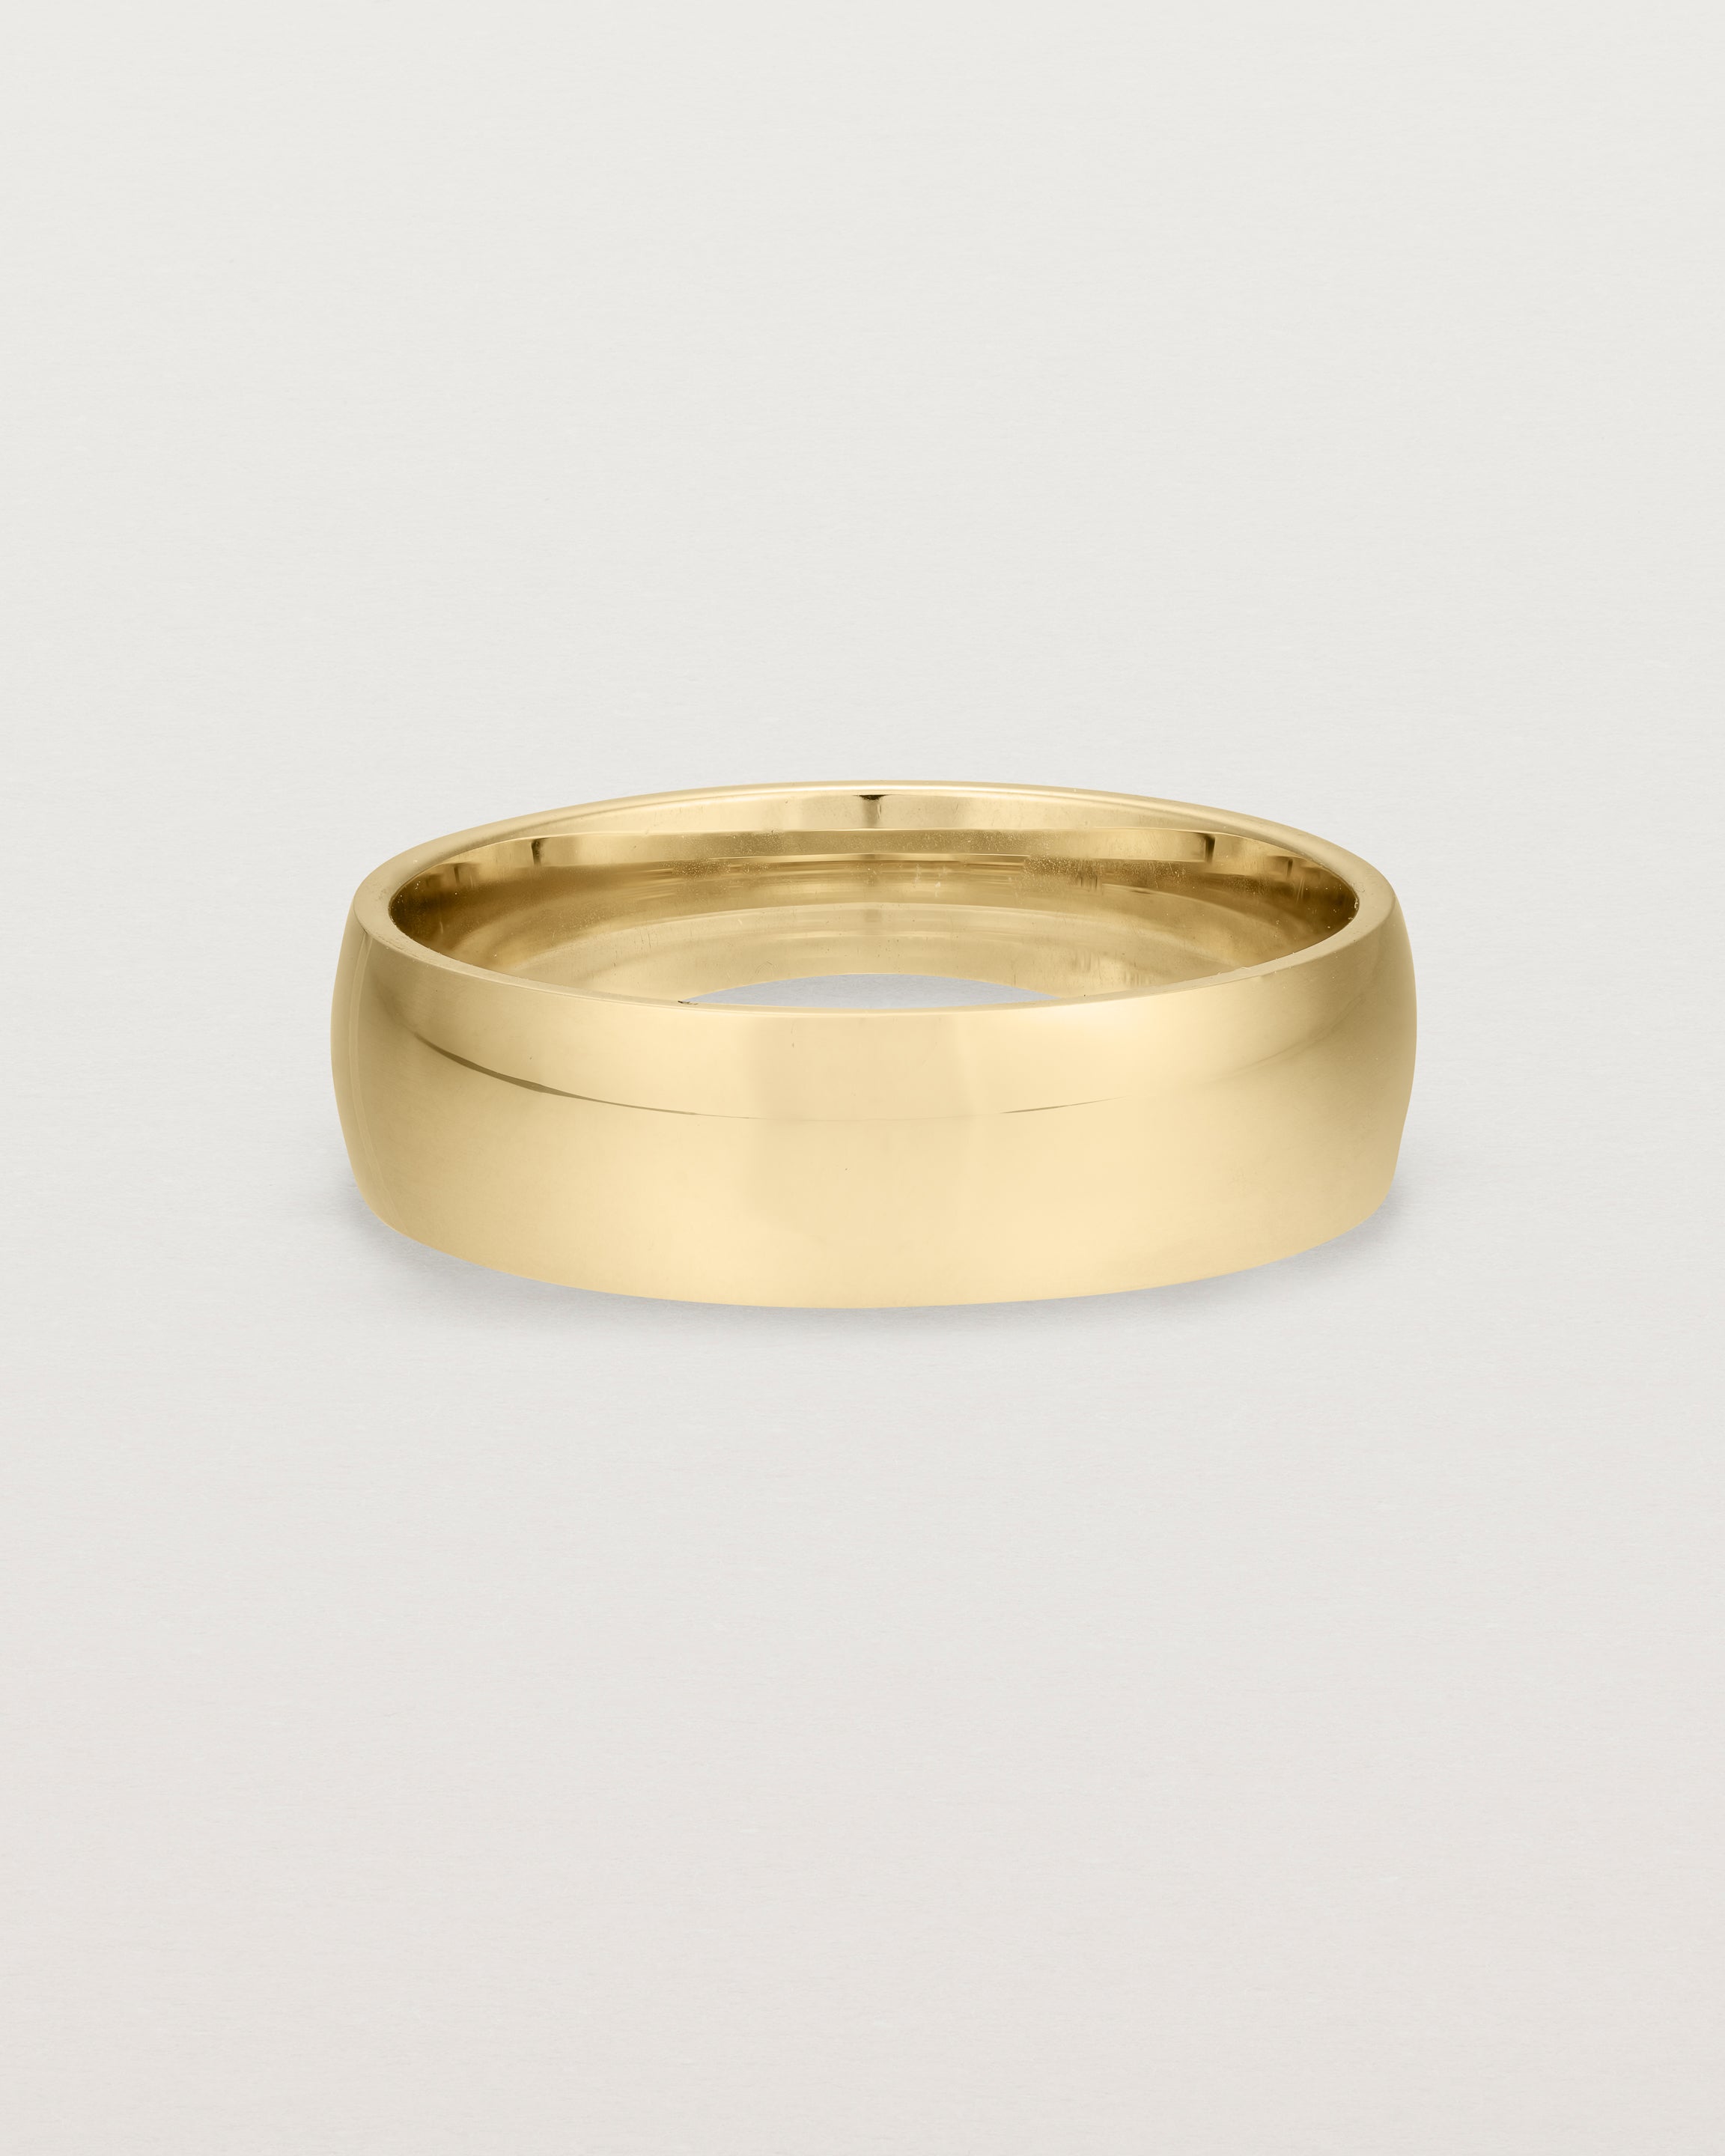 The front view of a heavy 6mm wedding band in yellow gold